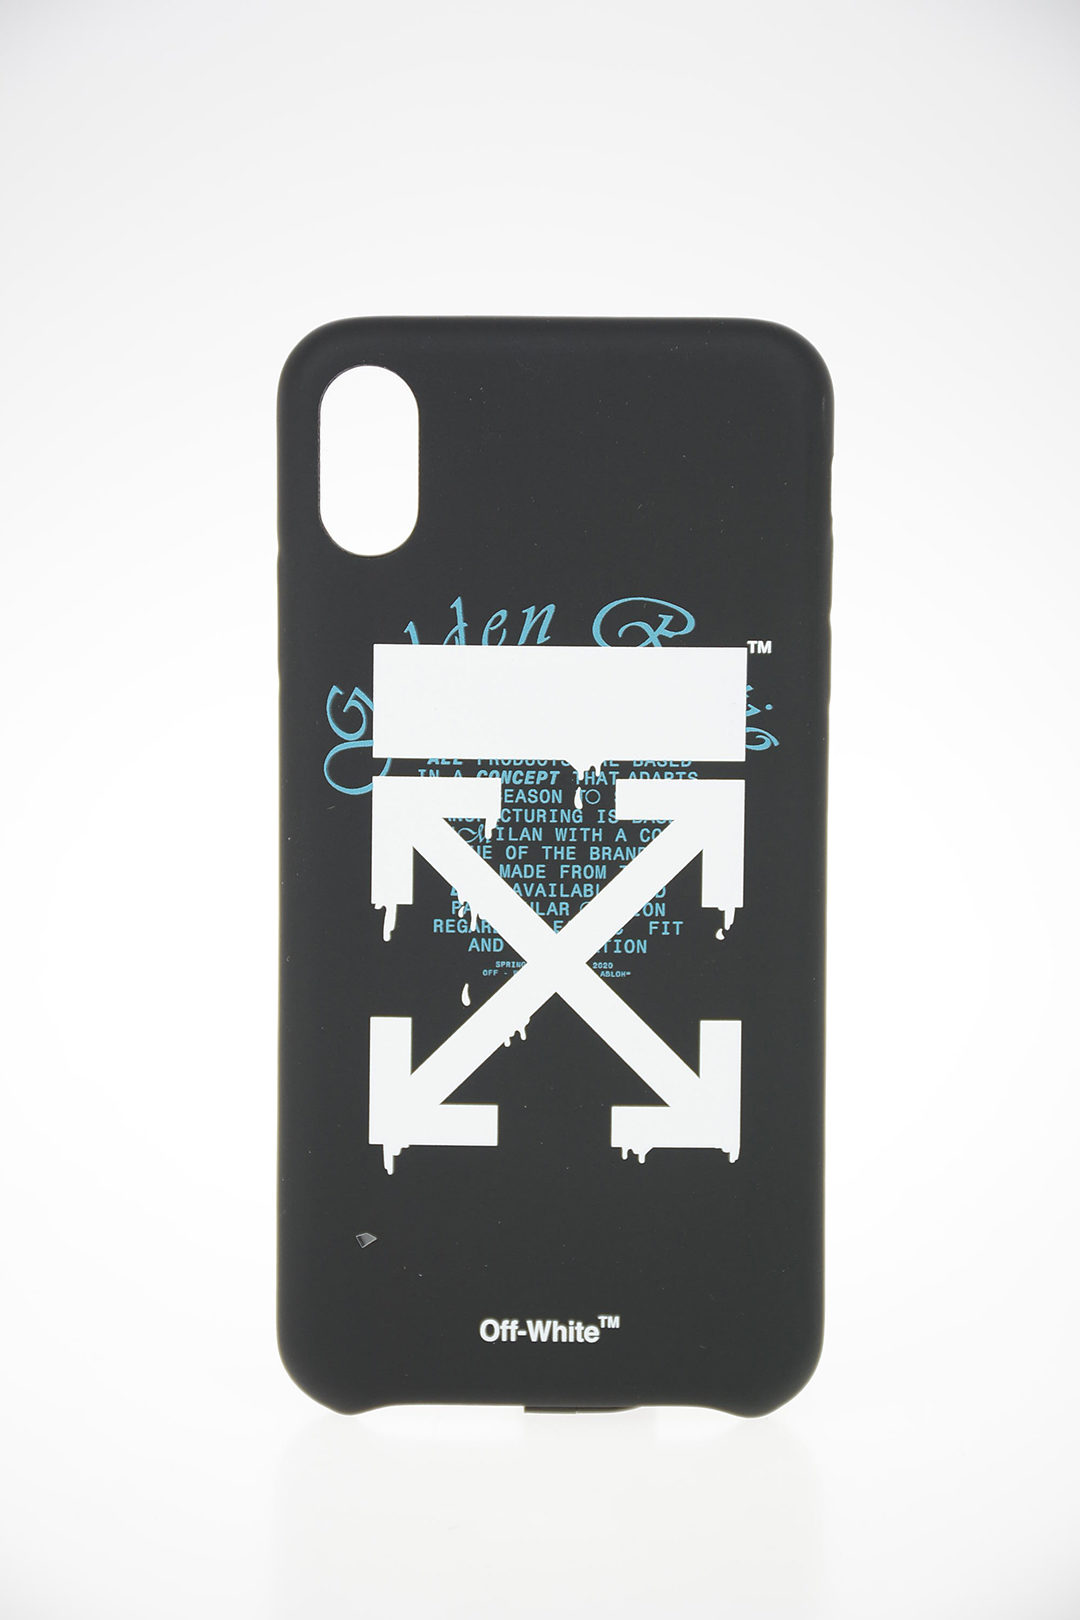 Iphone X/XS MAX Dripping Arrows Cover Case with Logo